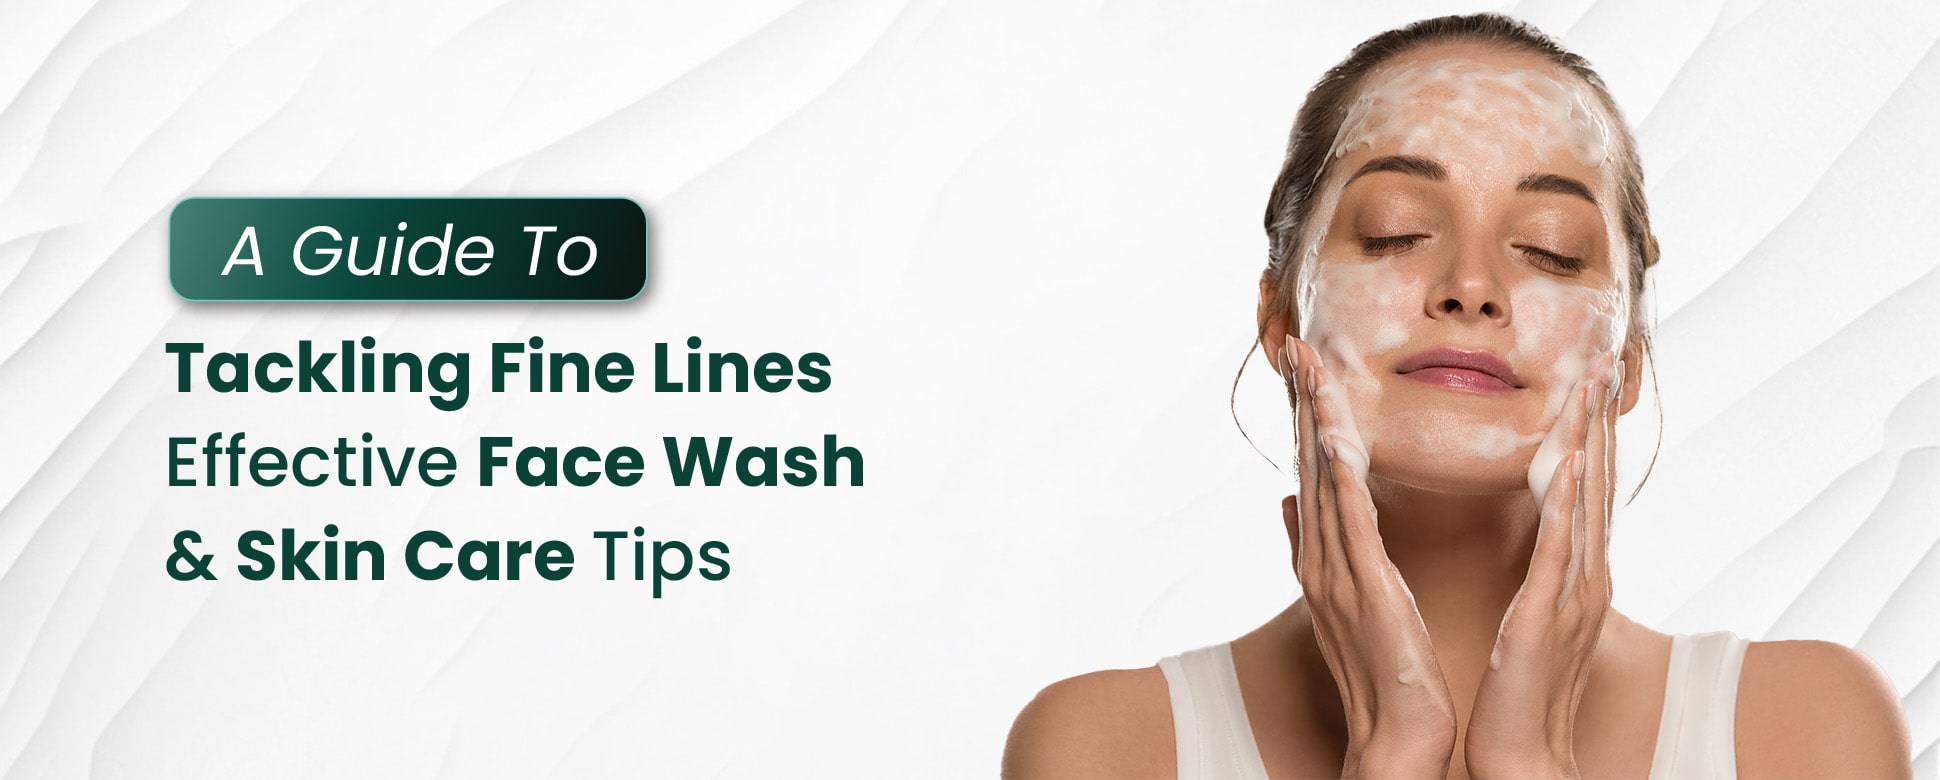 A Guide to Tackling Fine Lines: Effective Face Wash and Skincare Tips